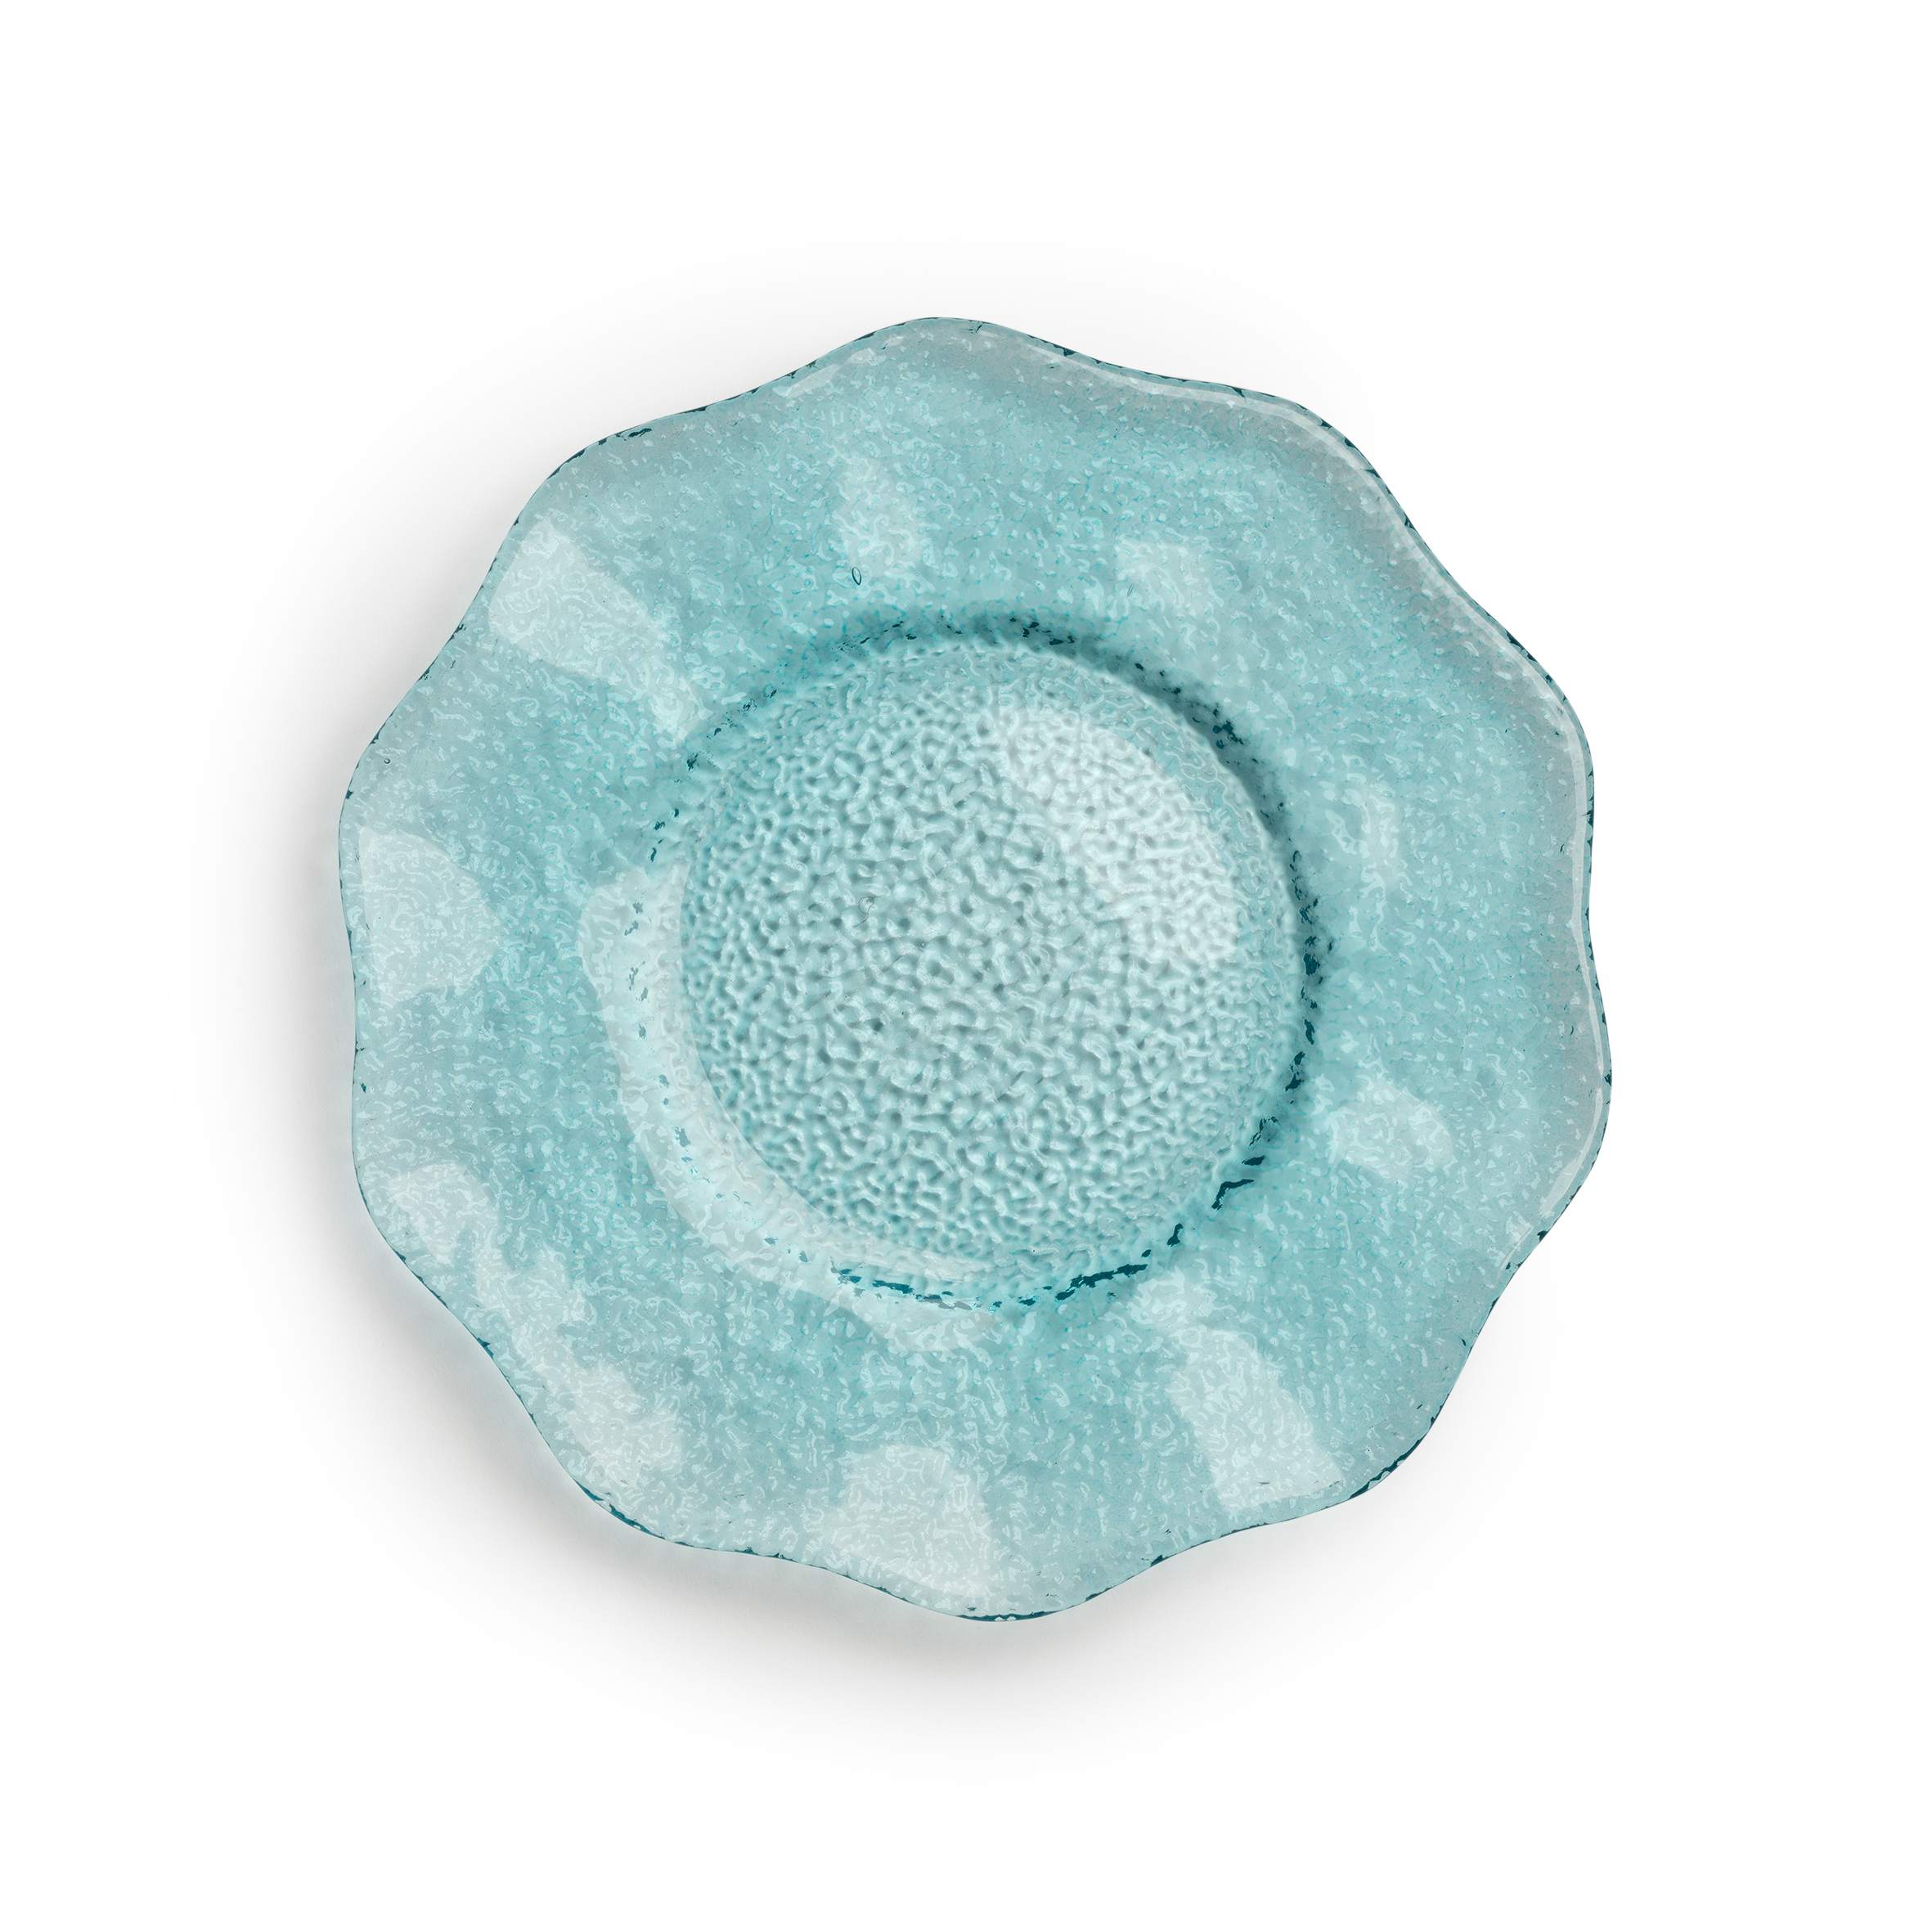 &klevering Wavy Plate in Turquoise